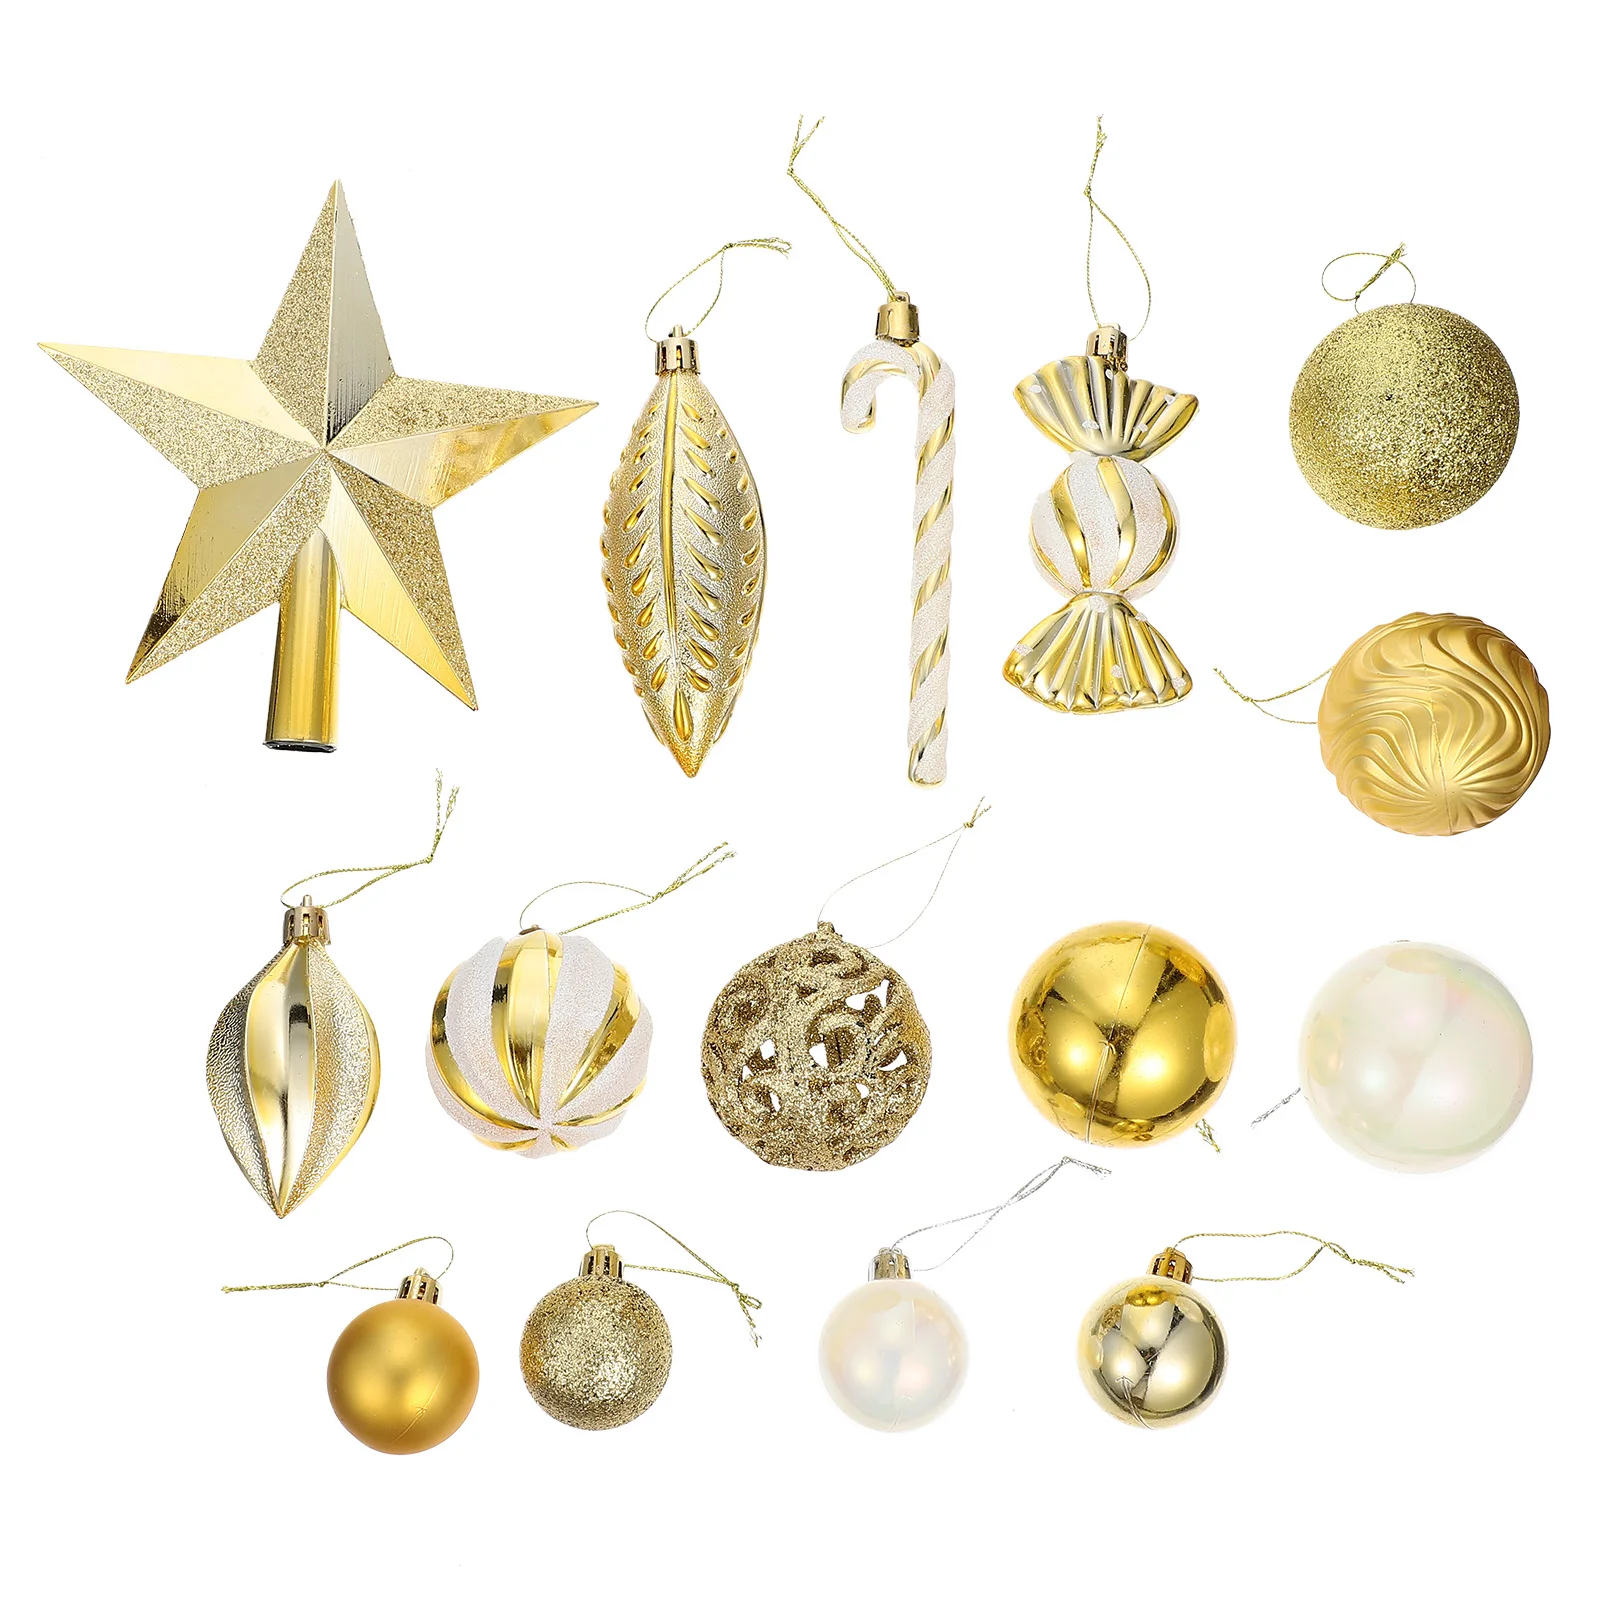 

Christmas Tree Hanging Ball Balls Xmas Decorations Ornaments Decor Baubles Silver Topper Party Star Shatterproof Sphere Gold